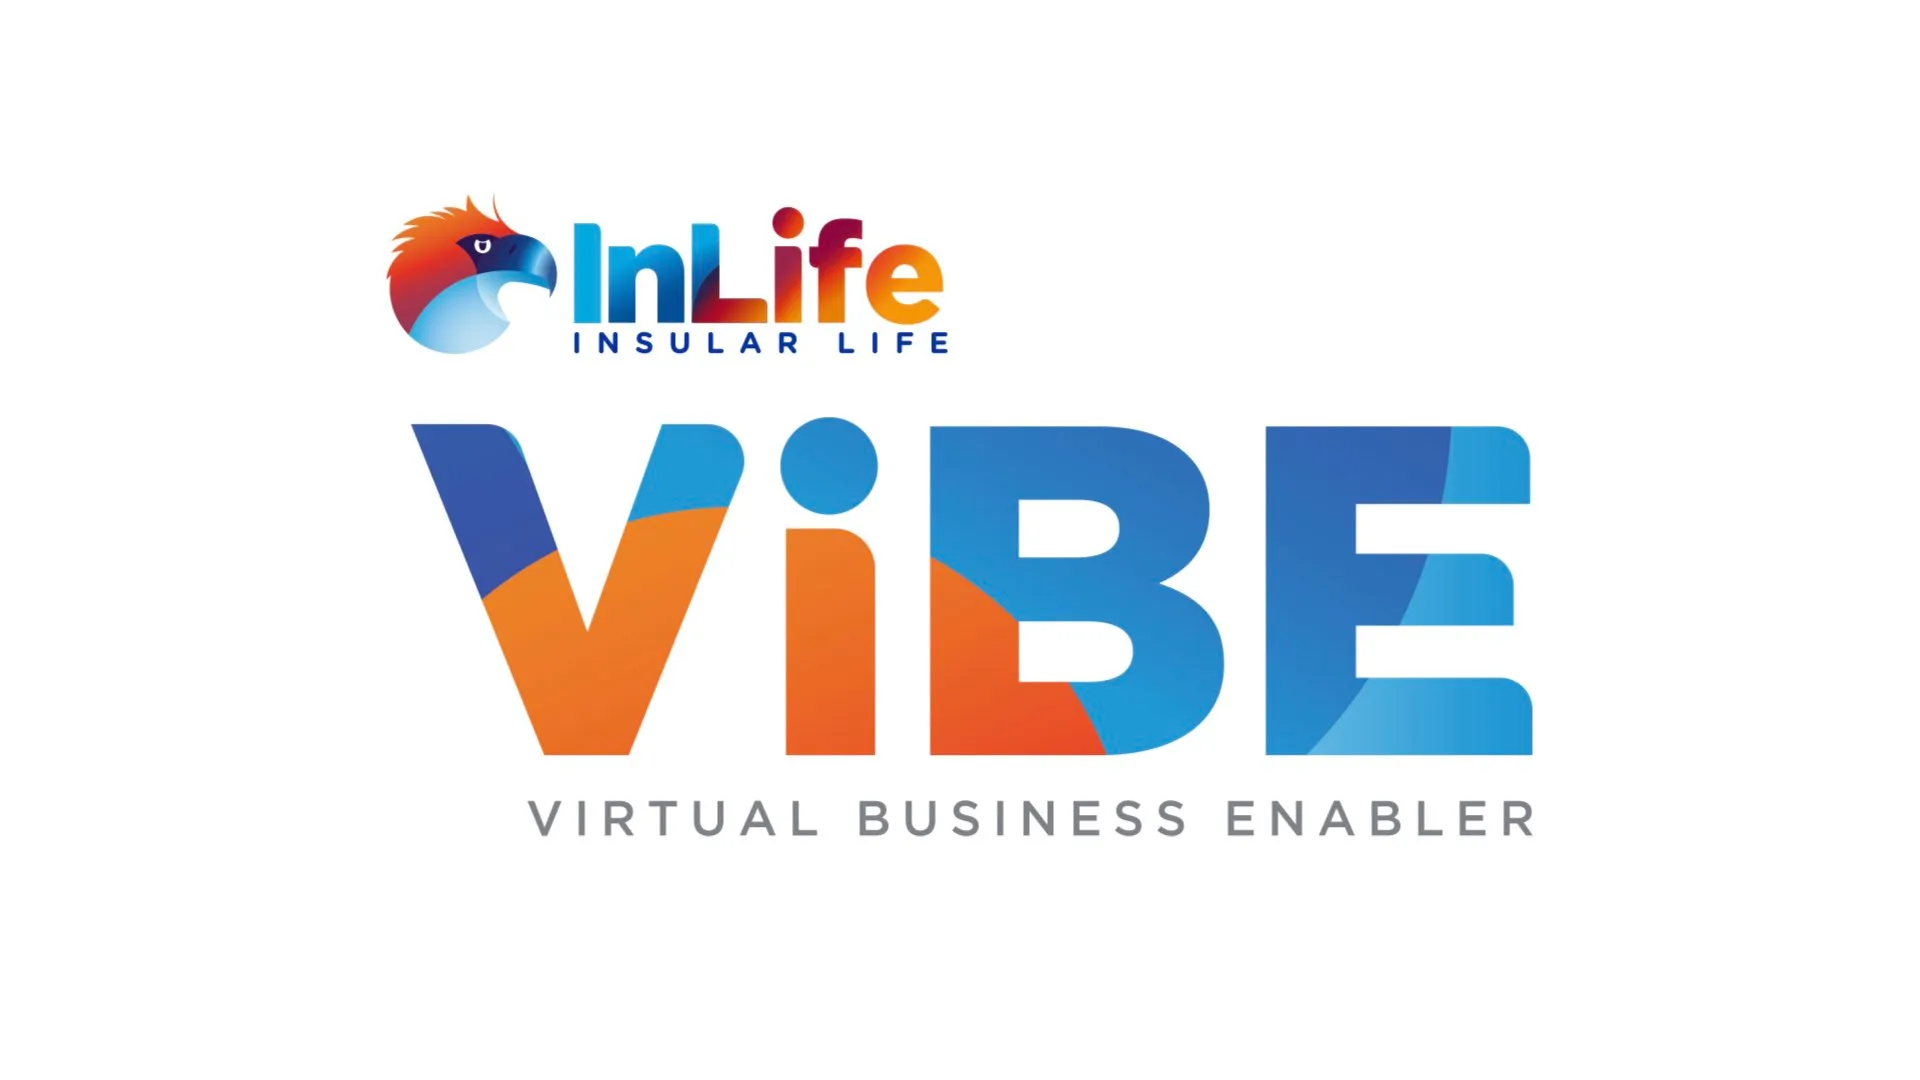 inlife-introduces-virtual-business-enabler-vibe-to-let-advisors-sell-life-policies-fully-online